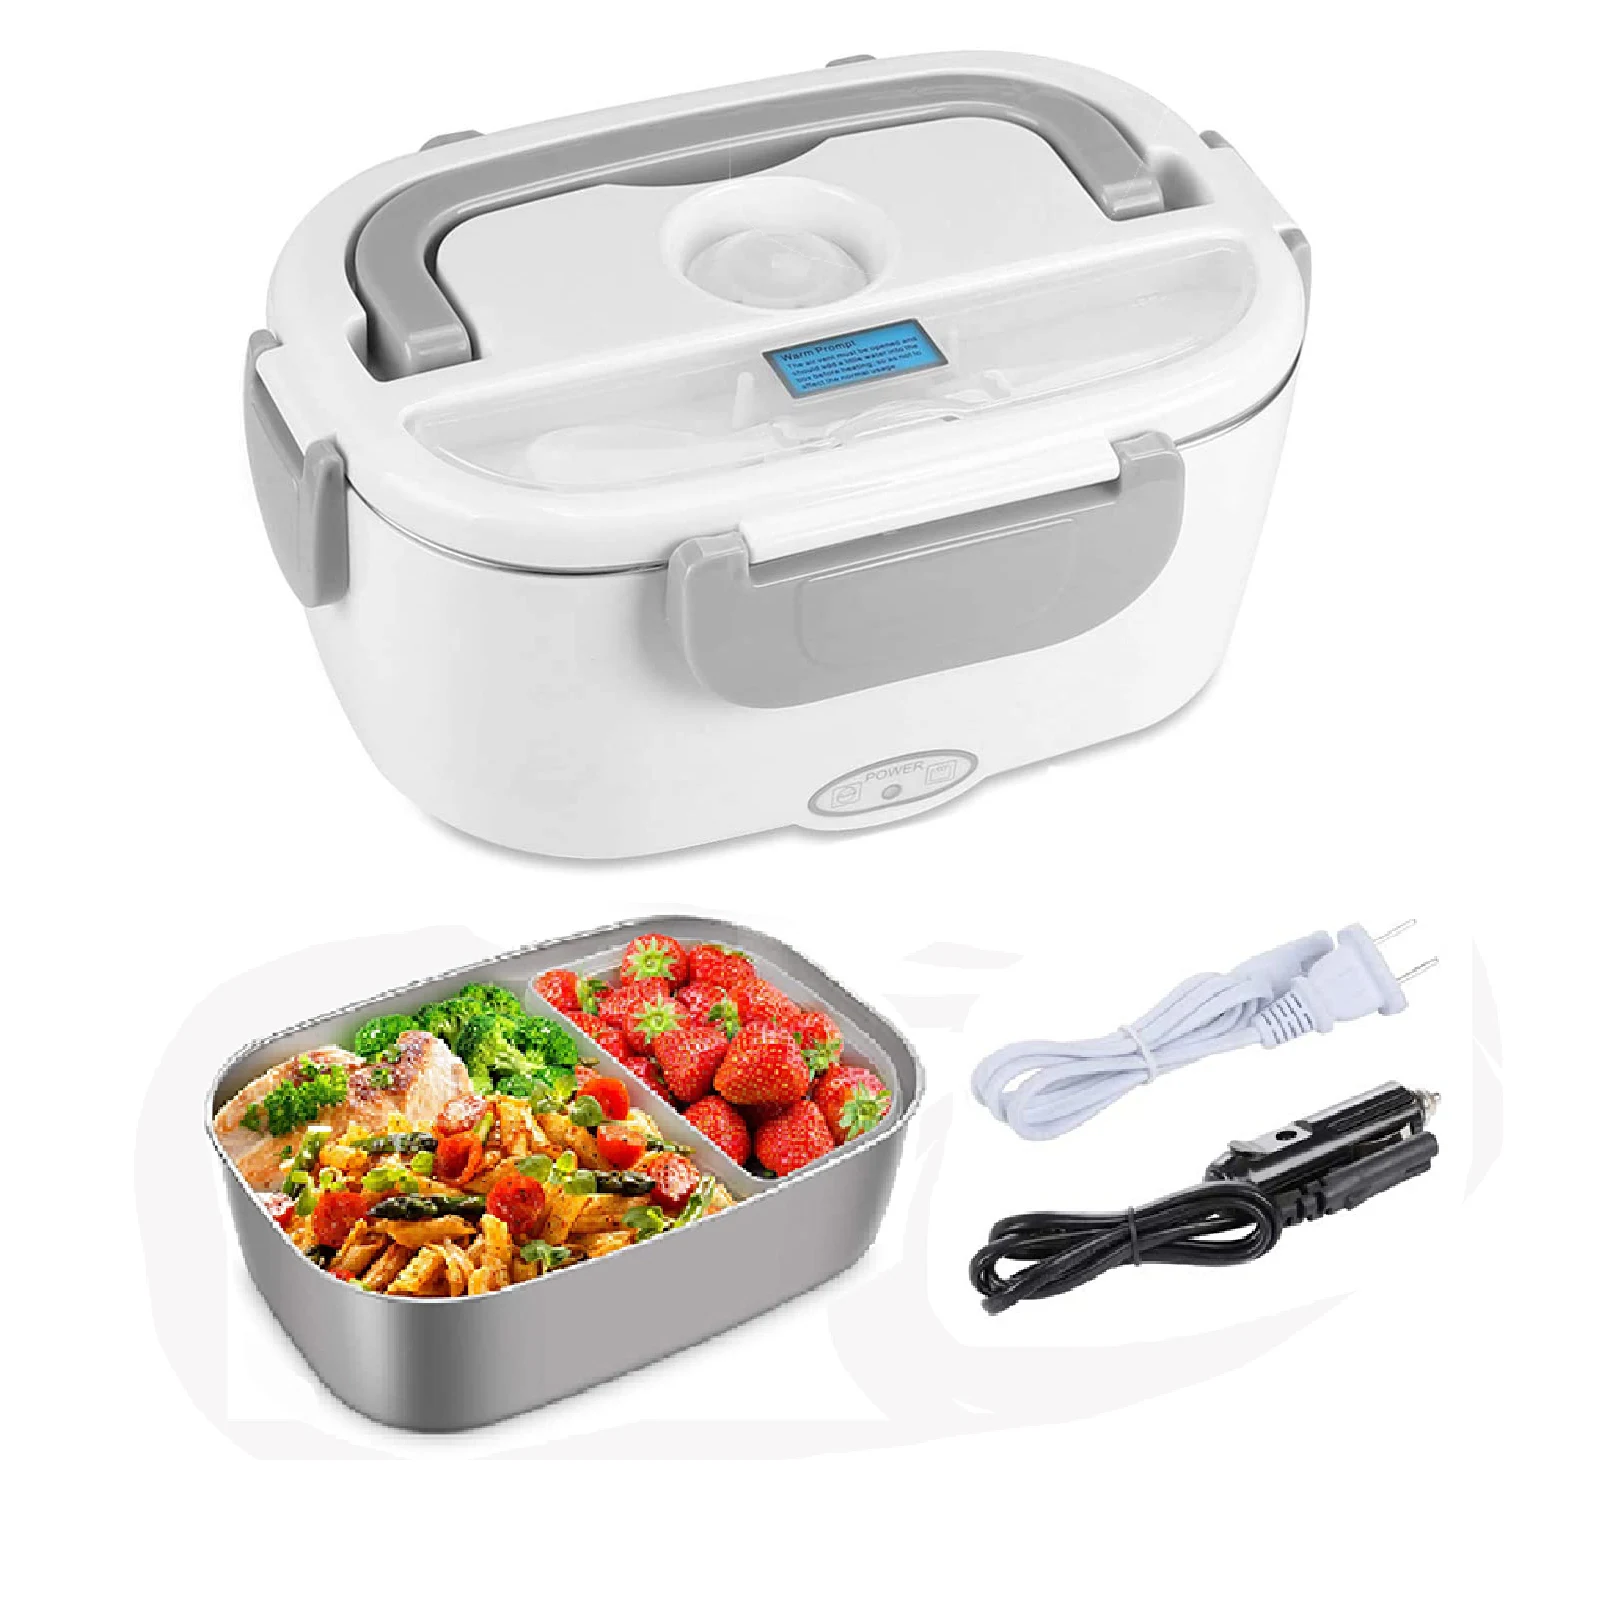 

heated box 110V 220V 40W car liven portable stainless steel food warmer electric lunch box